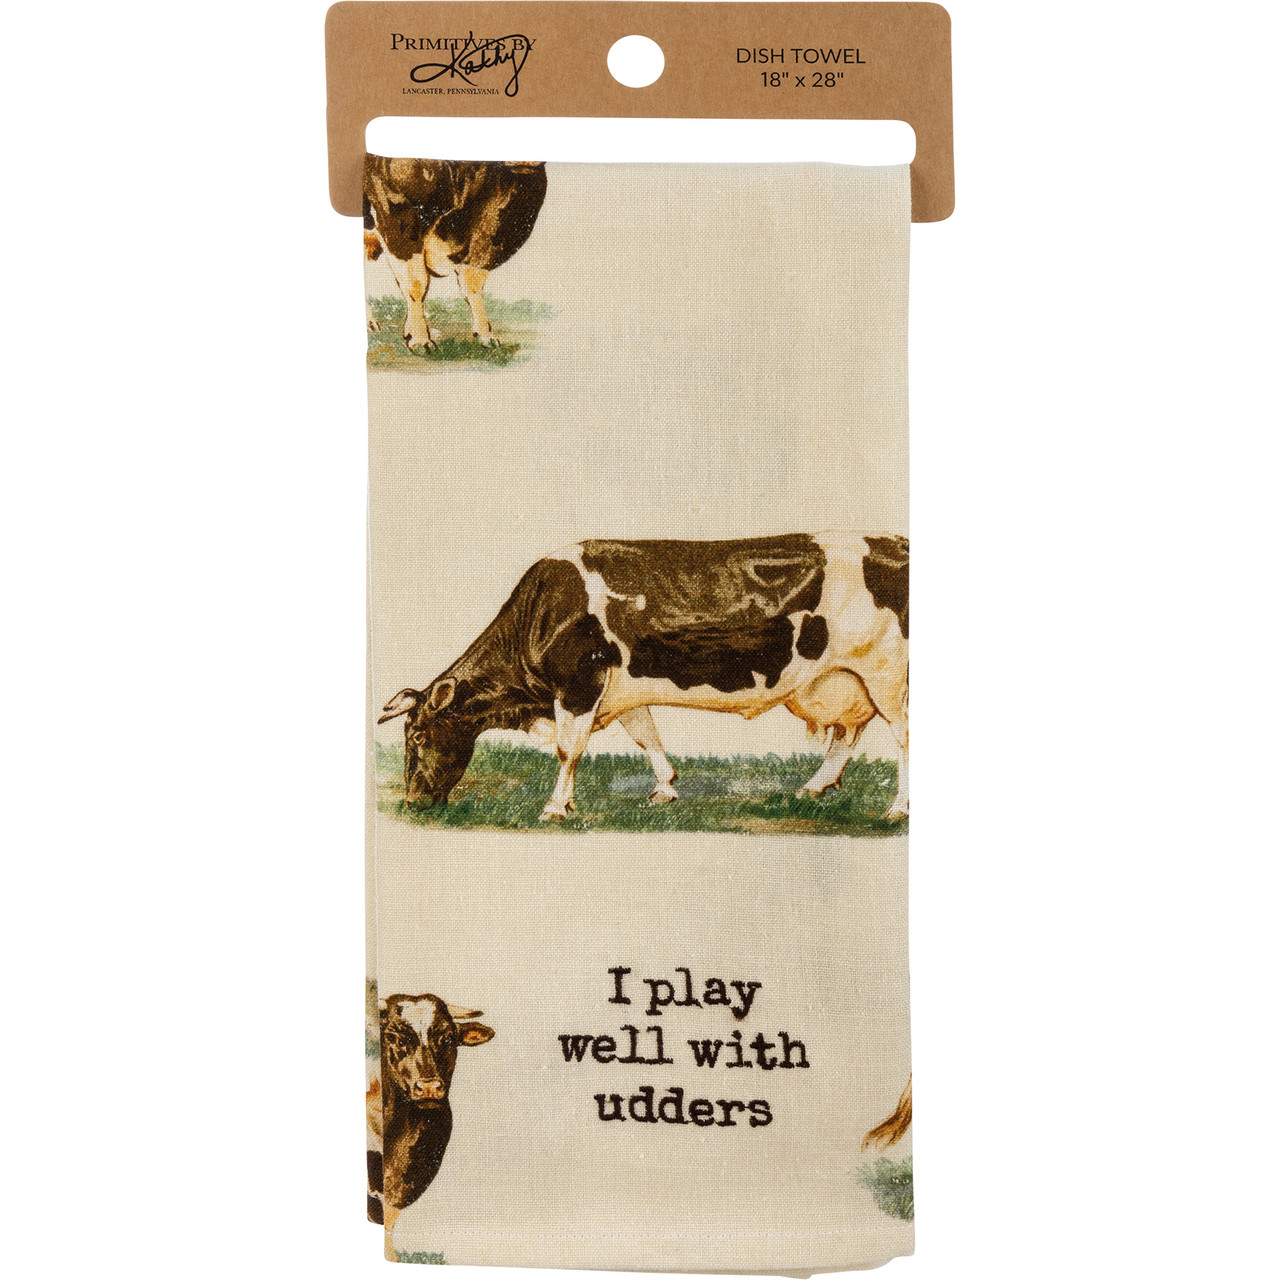 Vintage Inspired Farm Cow I Play Well With Udders Cotton Kitchen Dish Towel  18x28 from Primitives by Kathy - Cherryland Sales